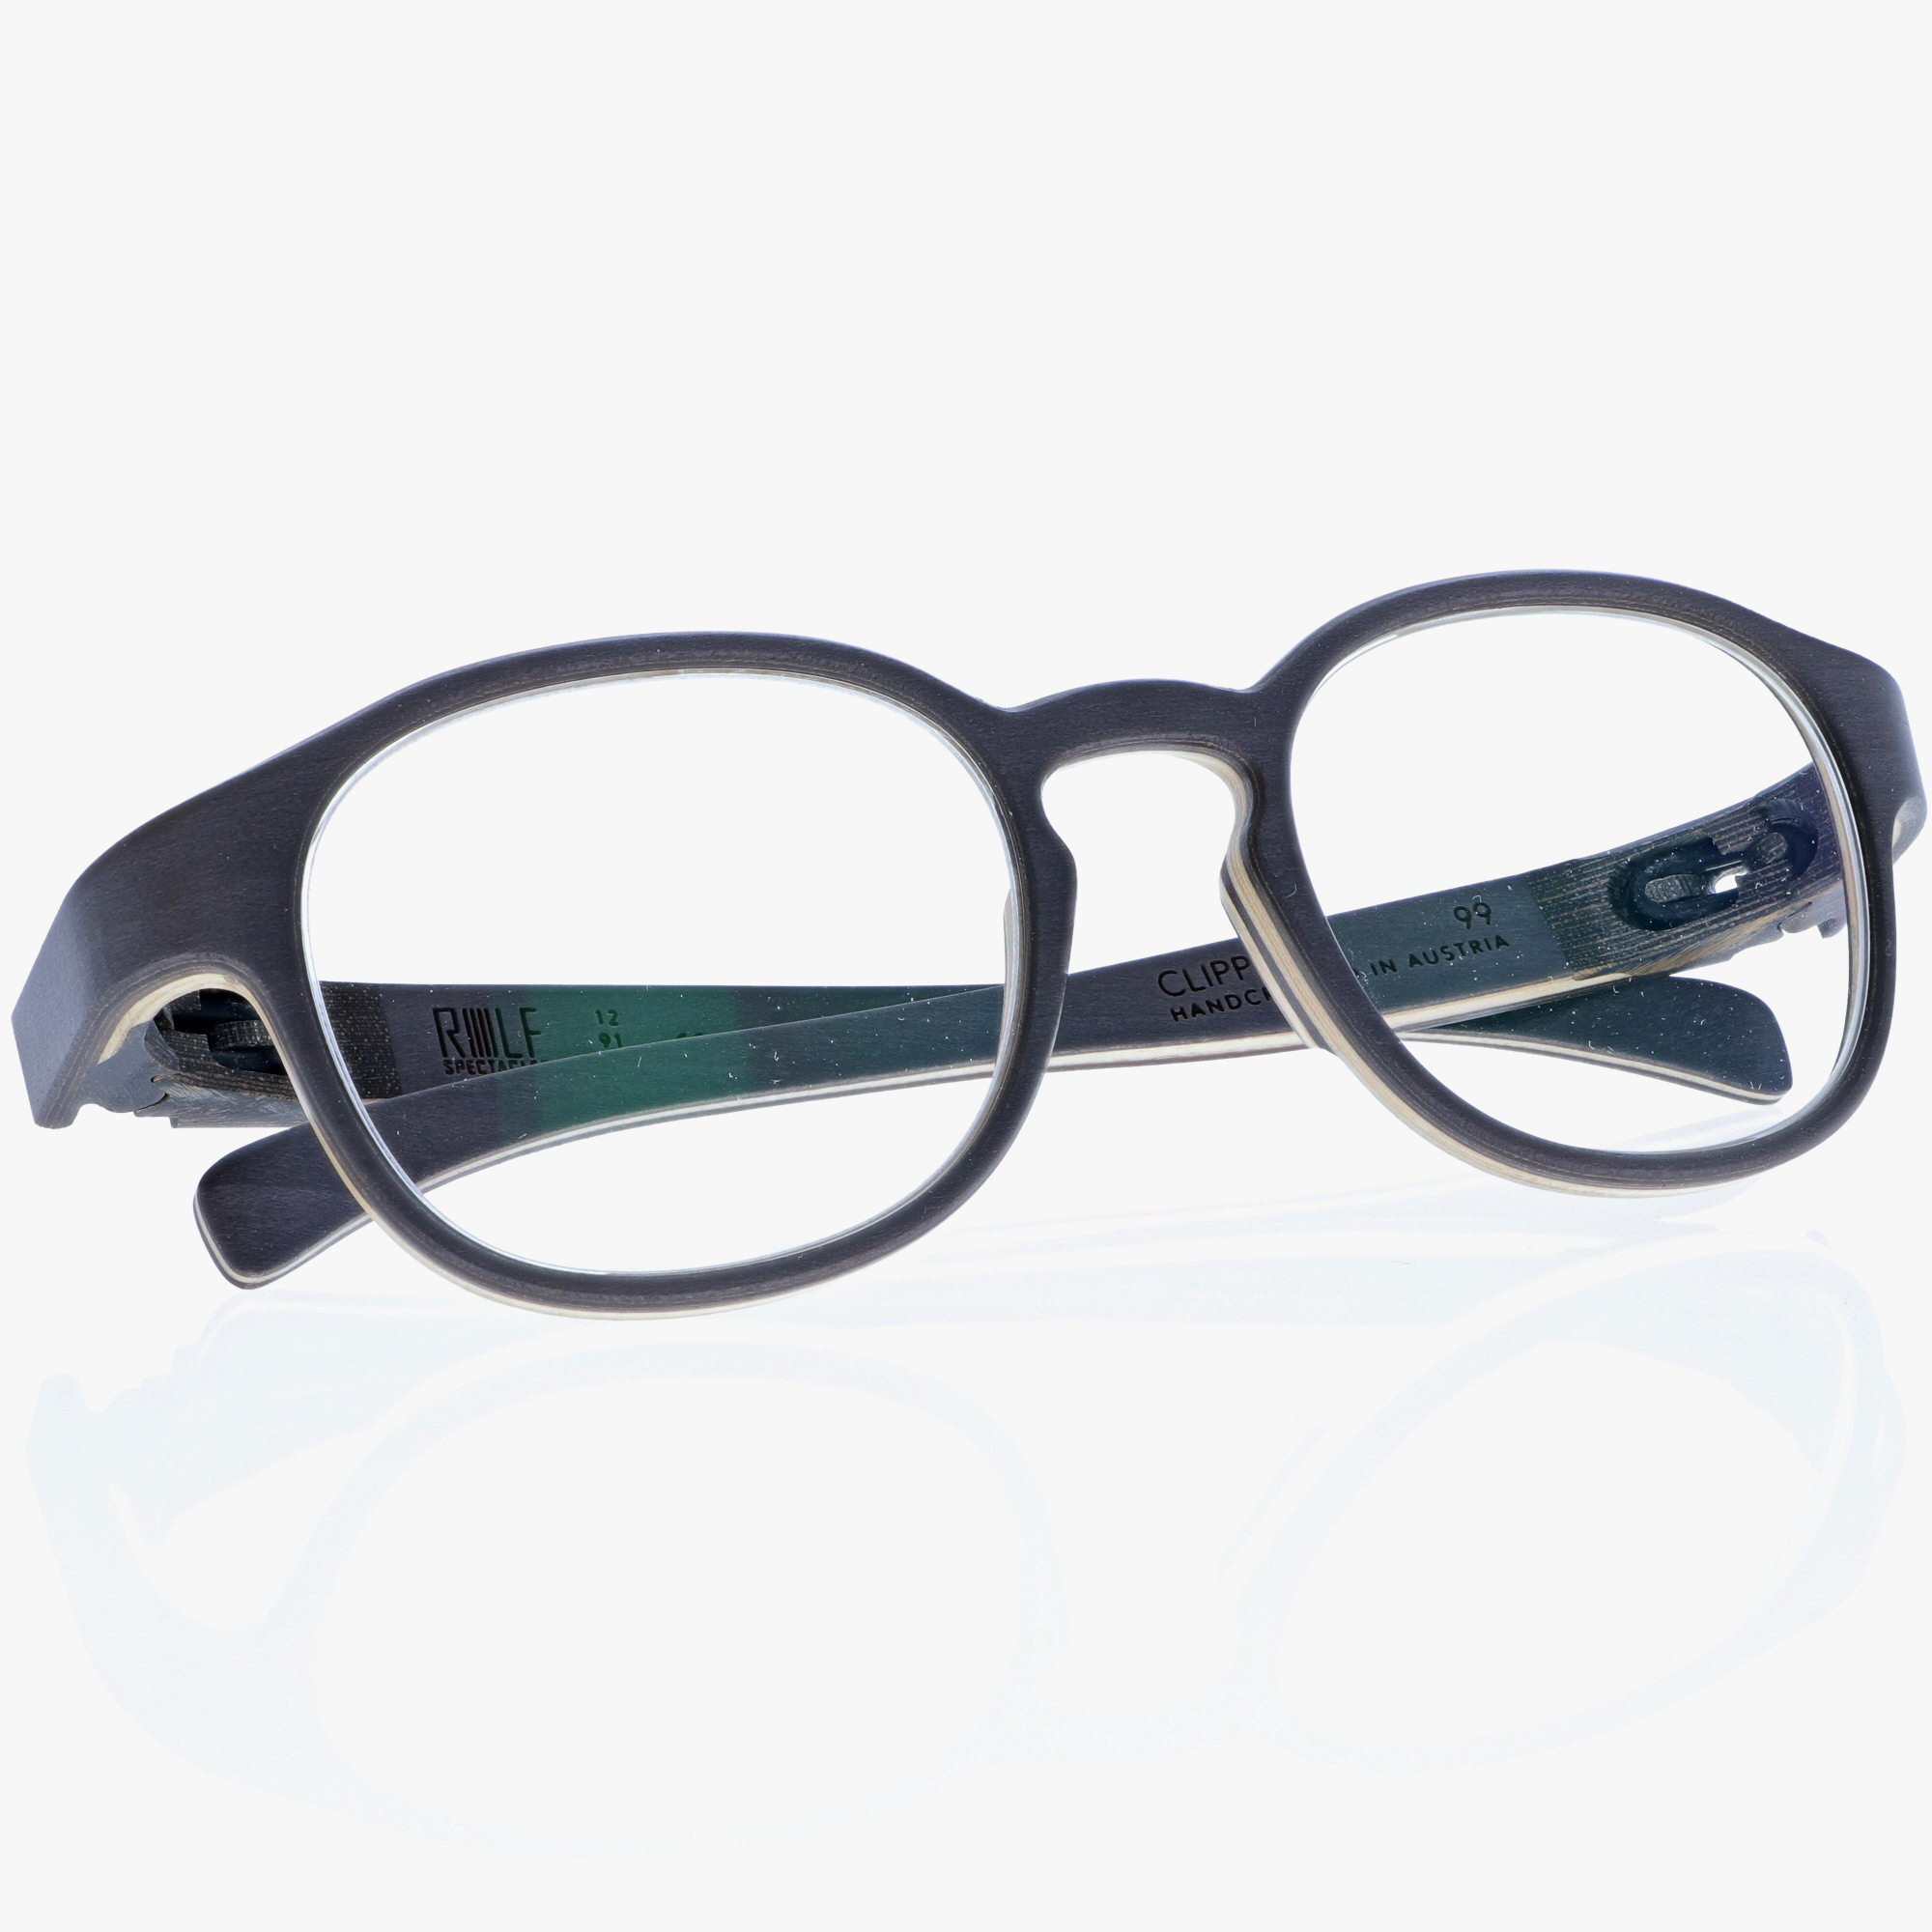 ROLF SPECTACLES / CLIPPER / SILBER-AHORN